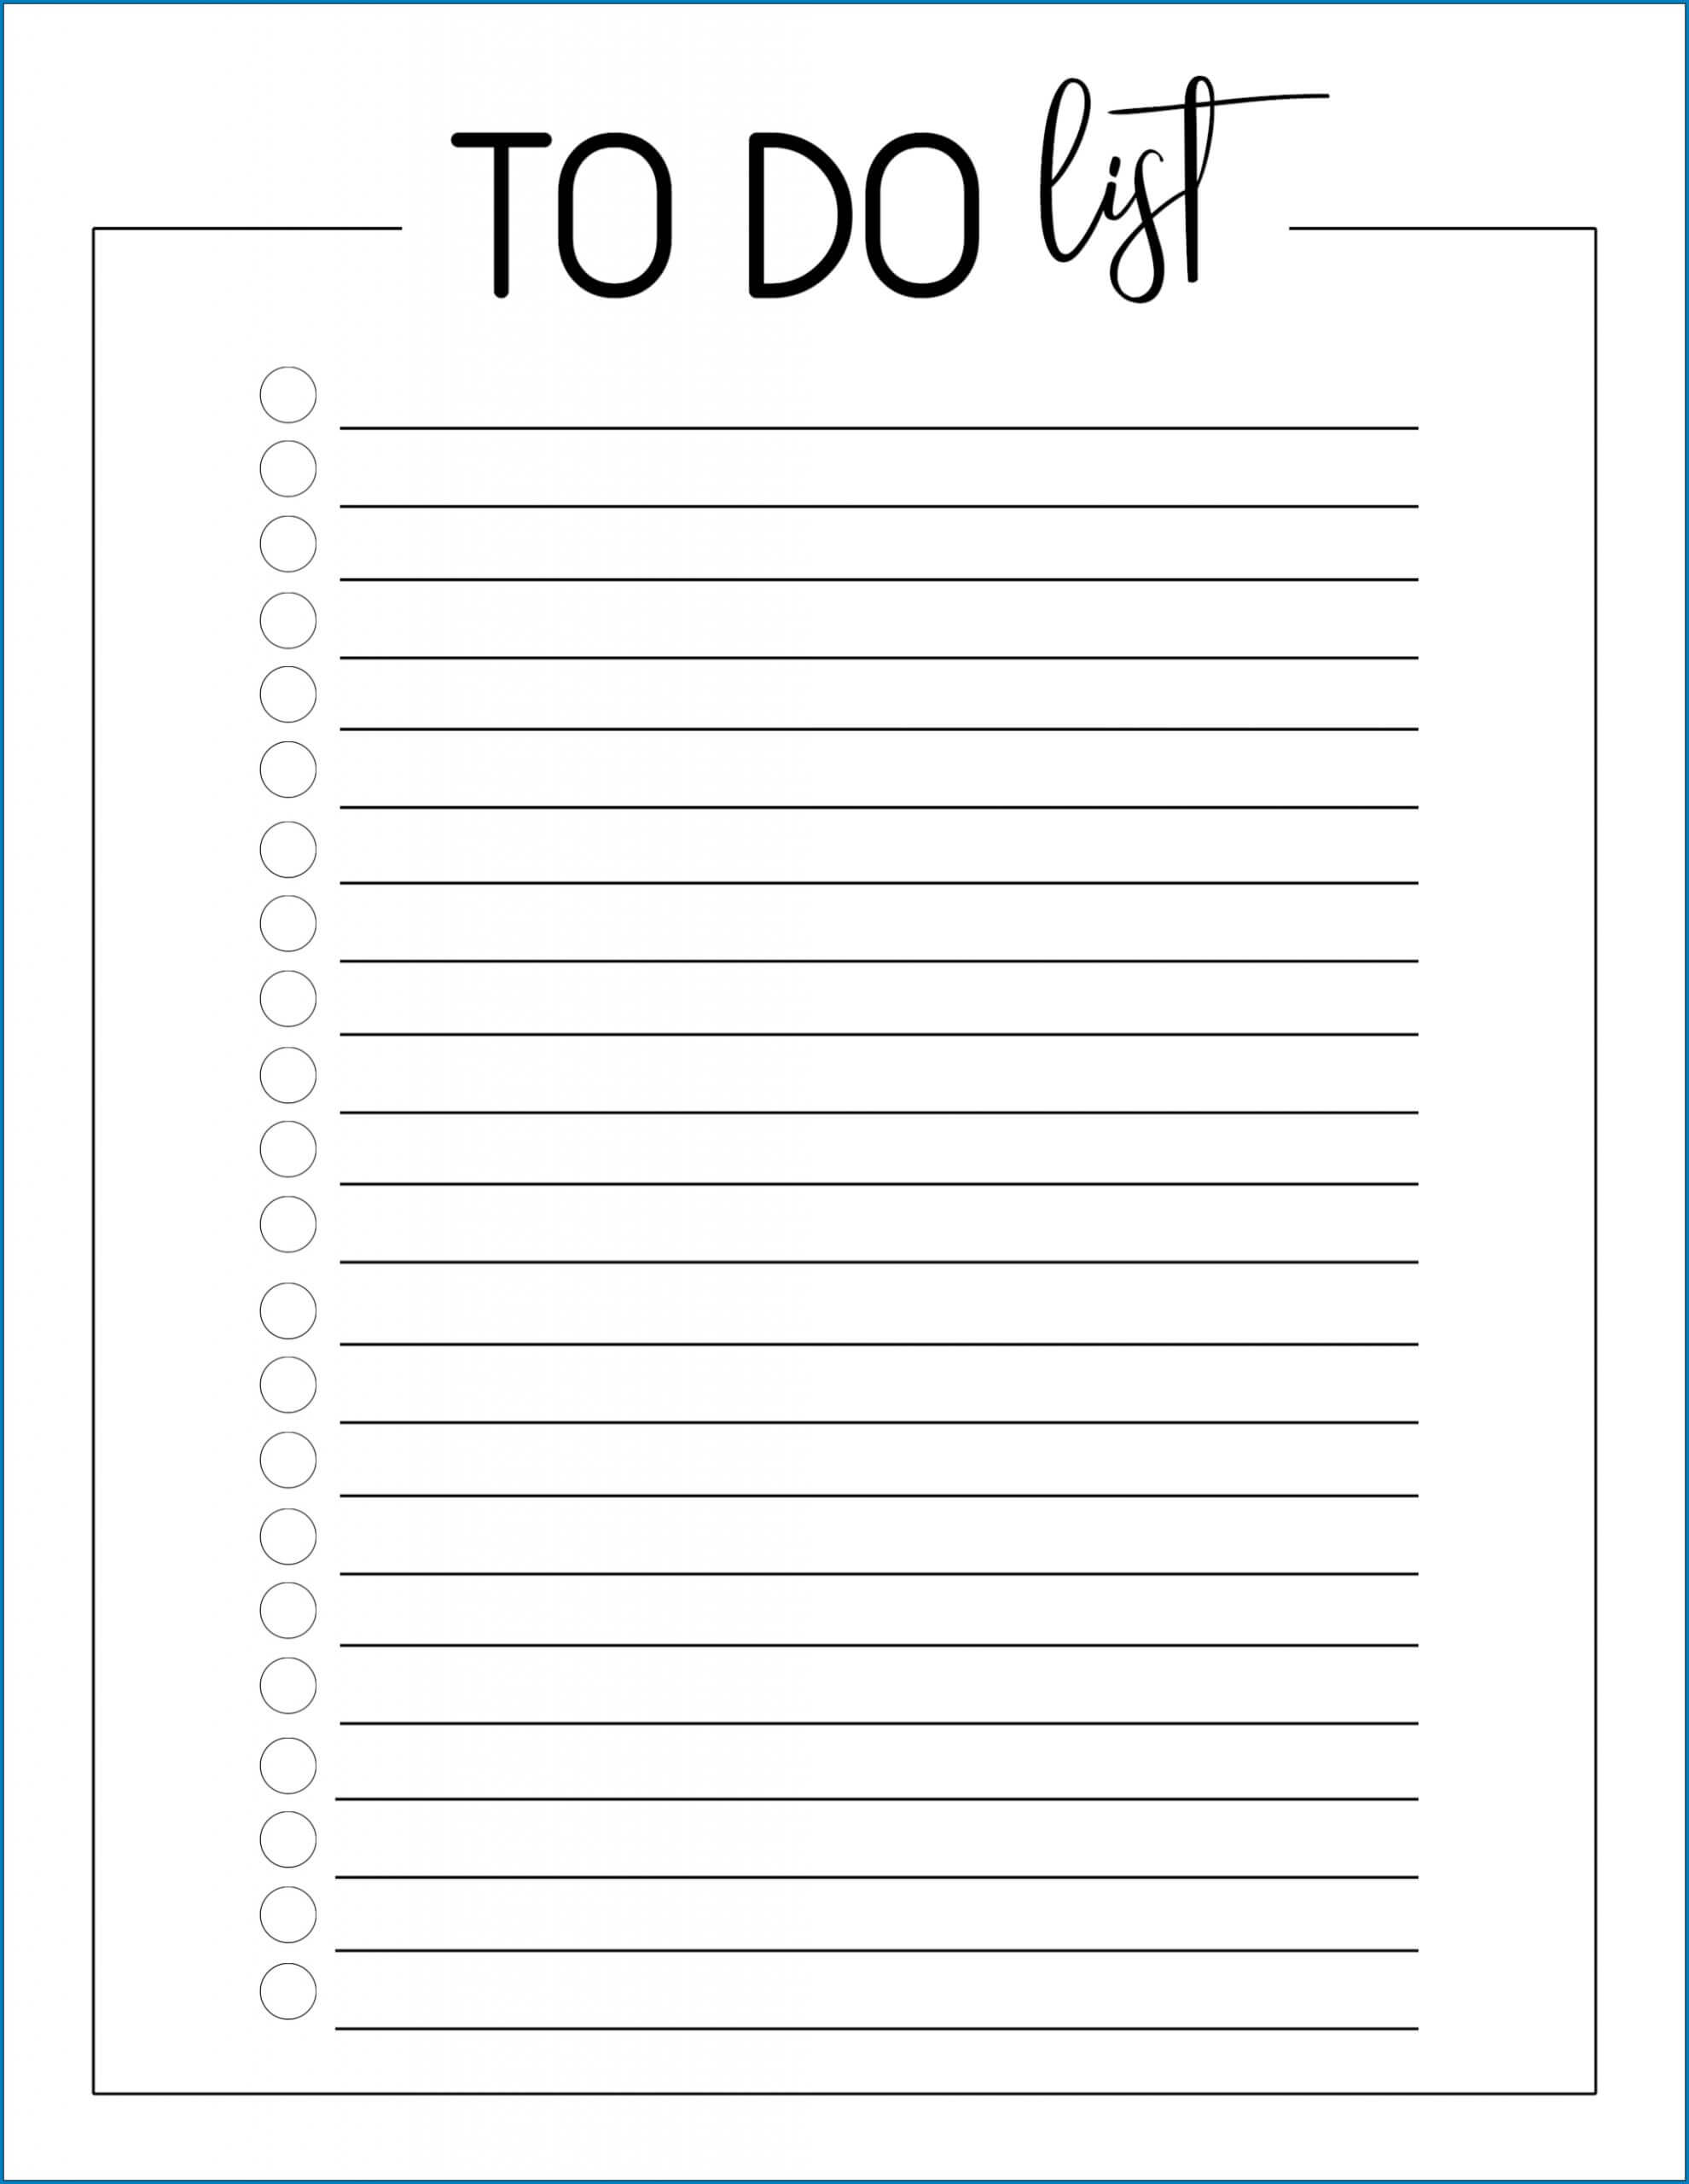 √ Free To Do List Printable Template | Templateral With Regard To Blank To Do List Template